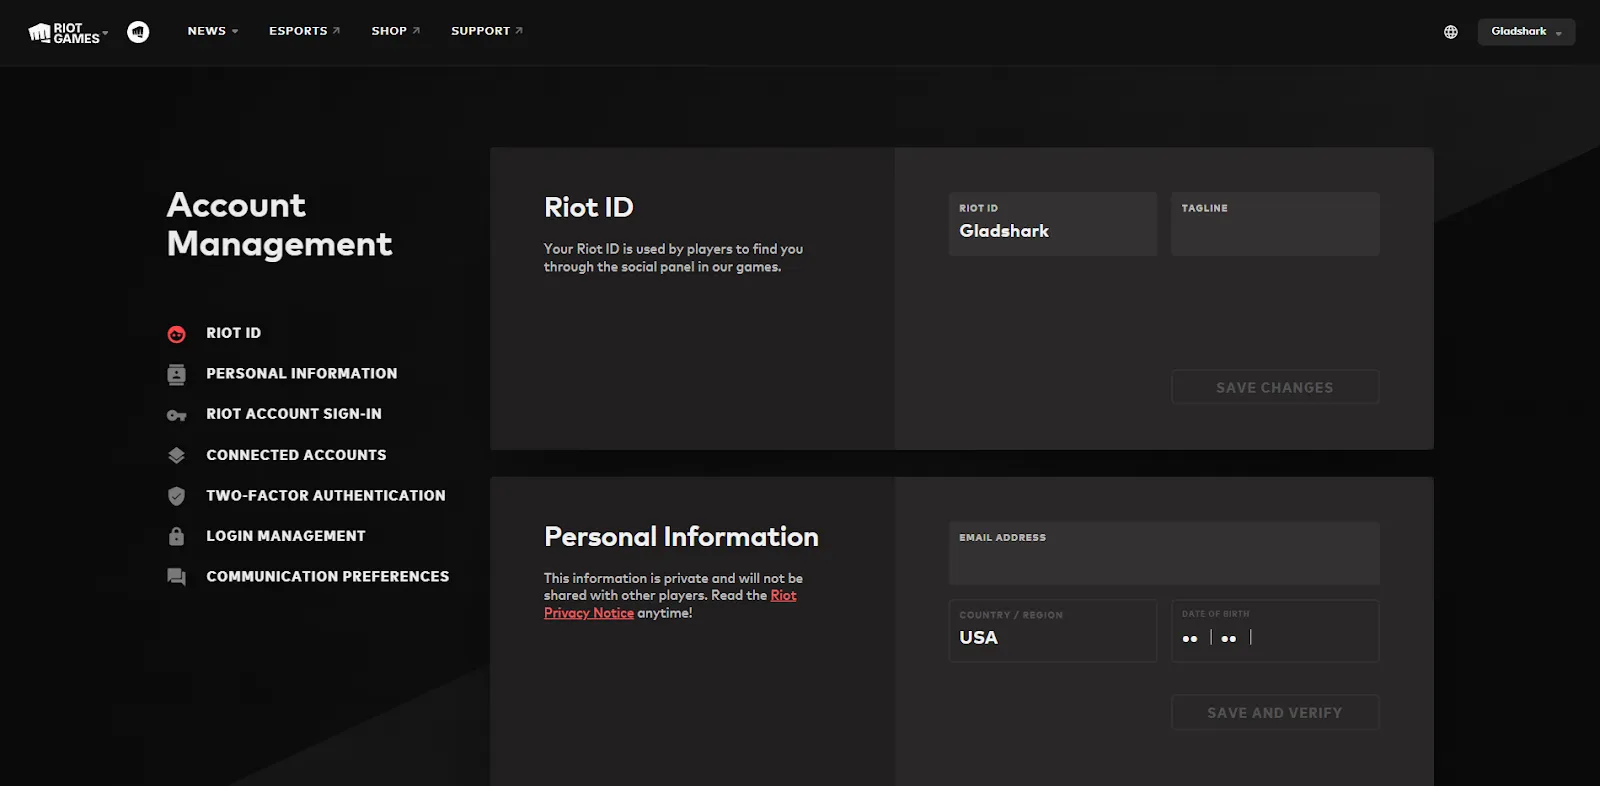 The account settings in the Riot Games Website.